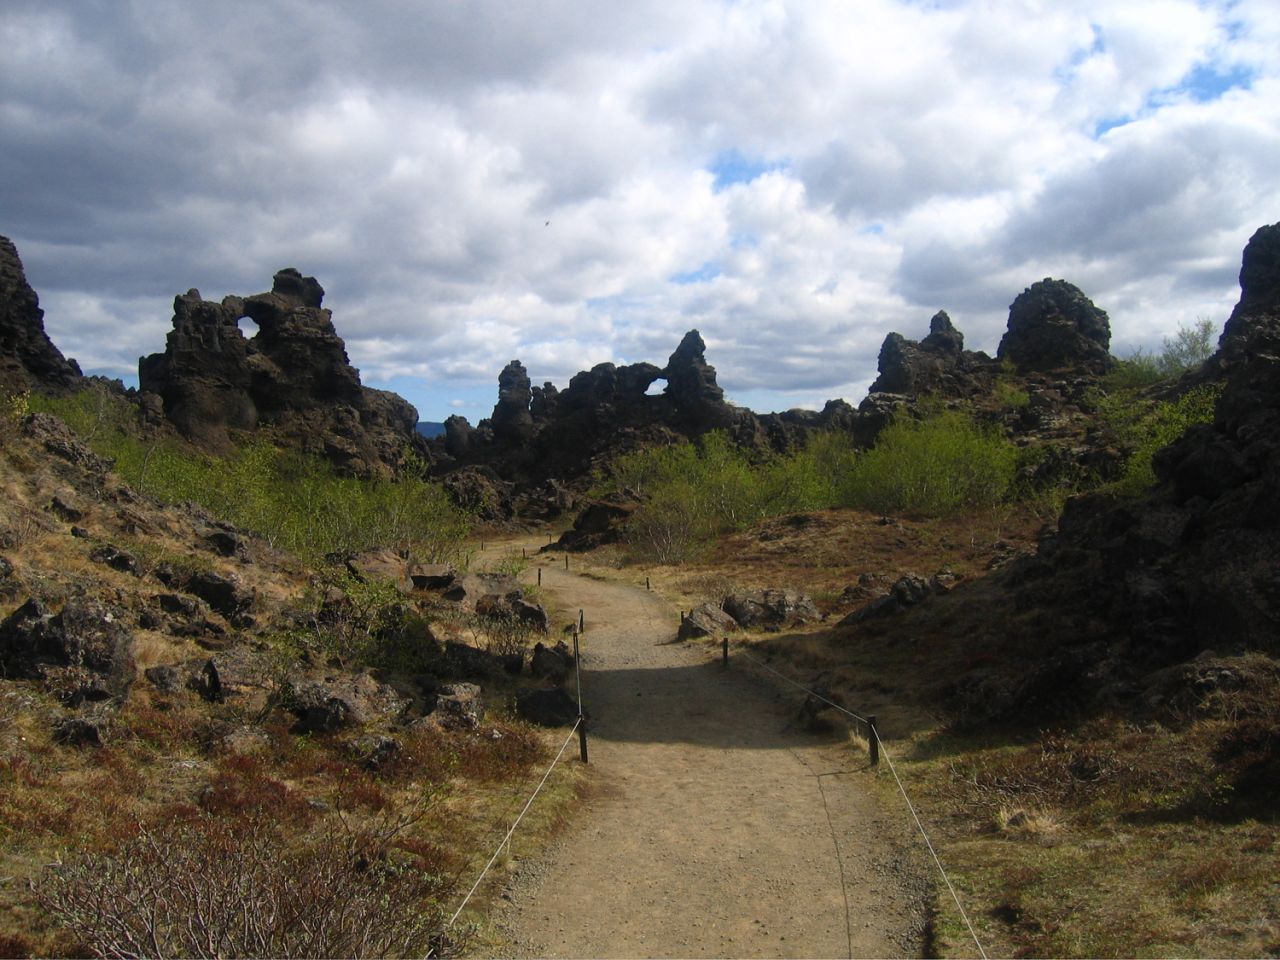 <strong>Dimmuborgir</strong> -- The black lava pillars were born from a collapsed lava tube from a large volcanic eruption more than 2,000 years ago.